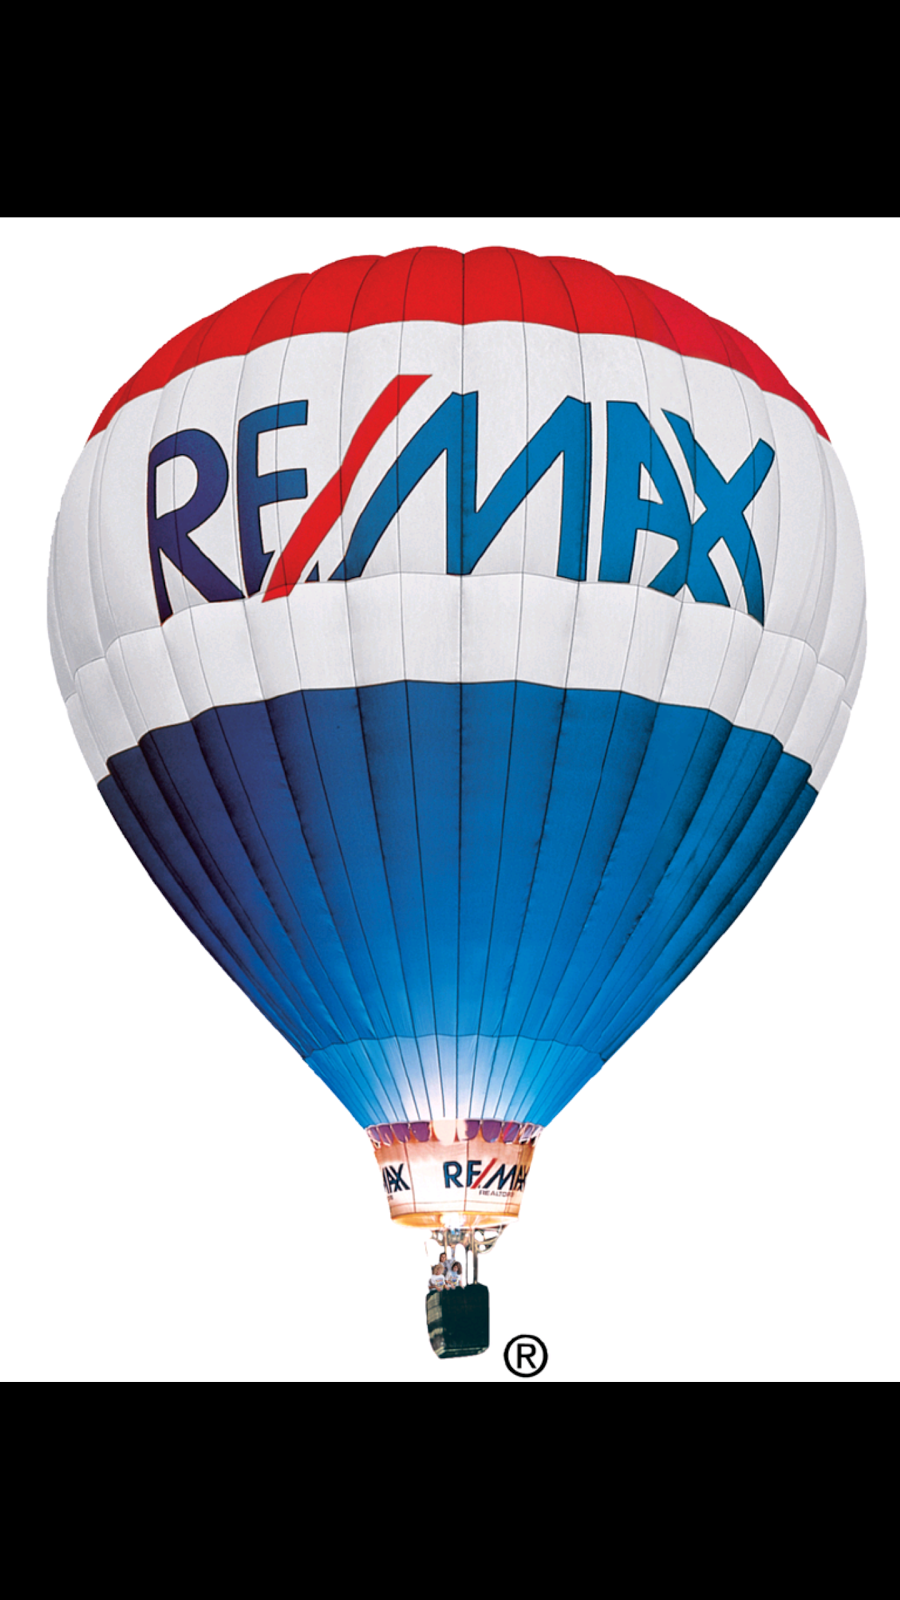 Remax Country | 1/4 Charlotte St, Crows Nest QLD 4355, Australia | Phone: (07) 4698 2561